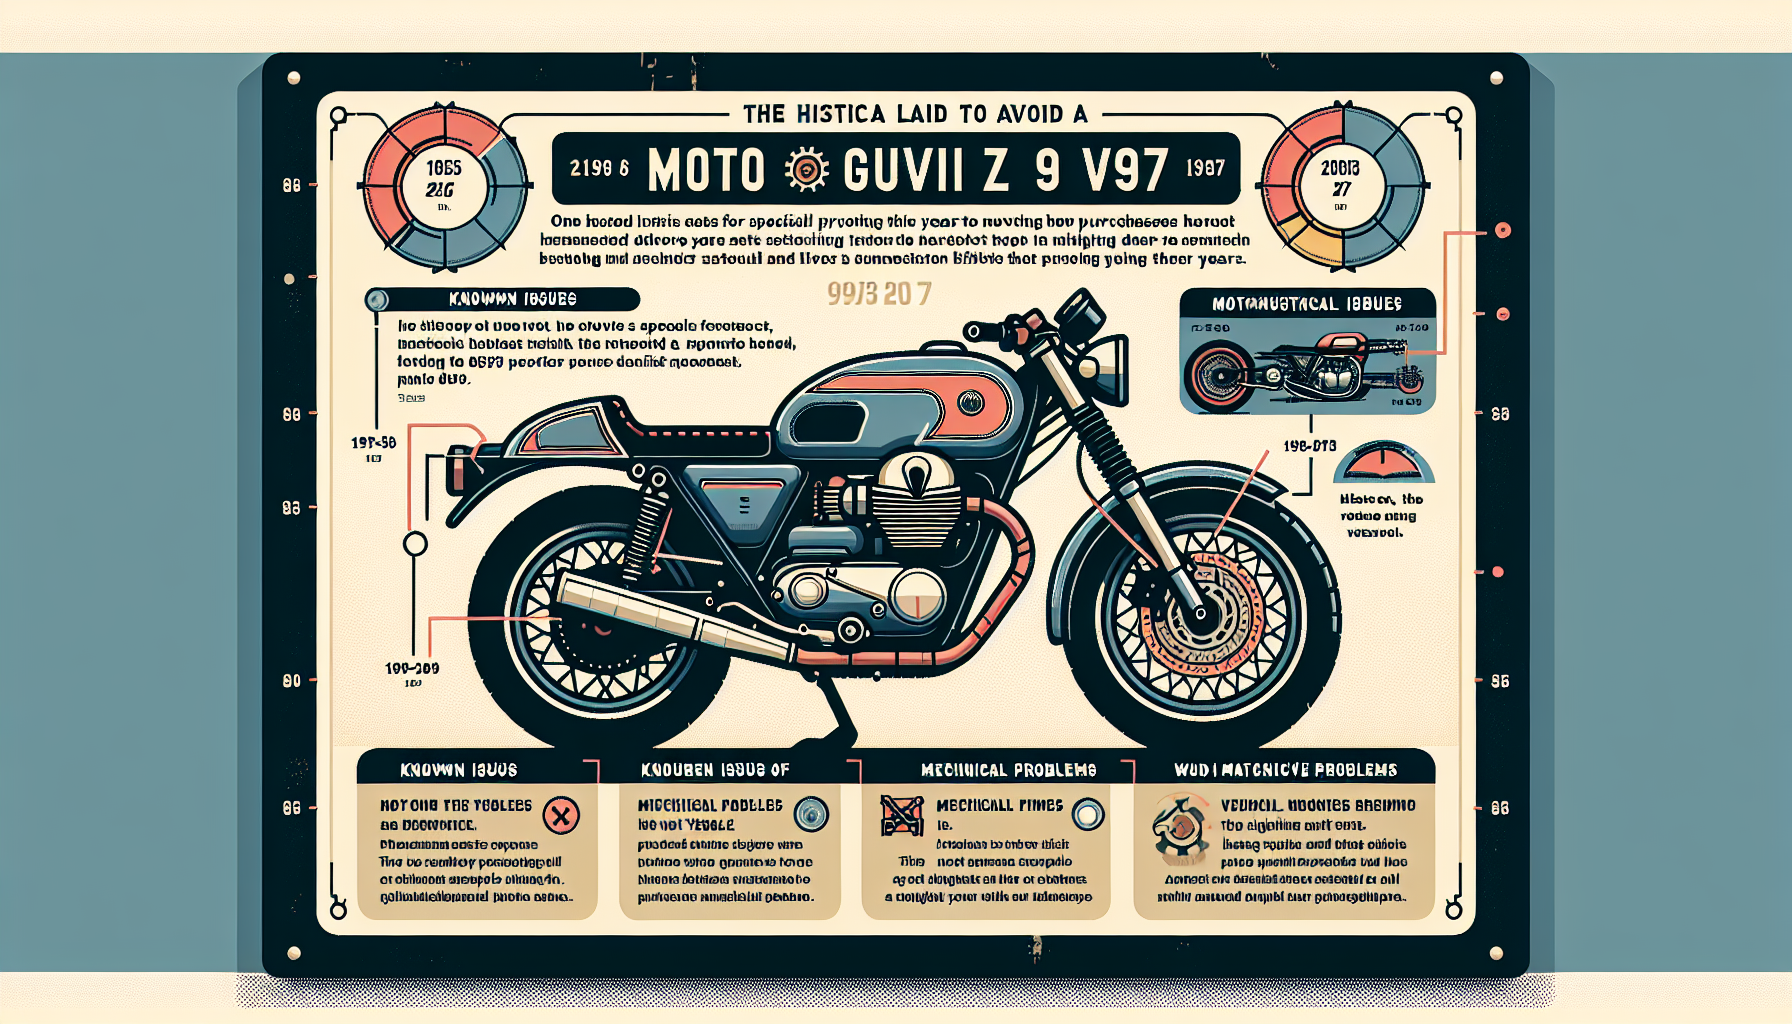 The Best Years to Avoid for Moto Guzzi V9